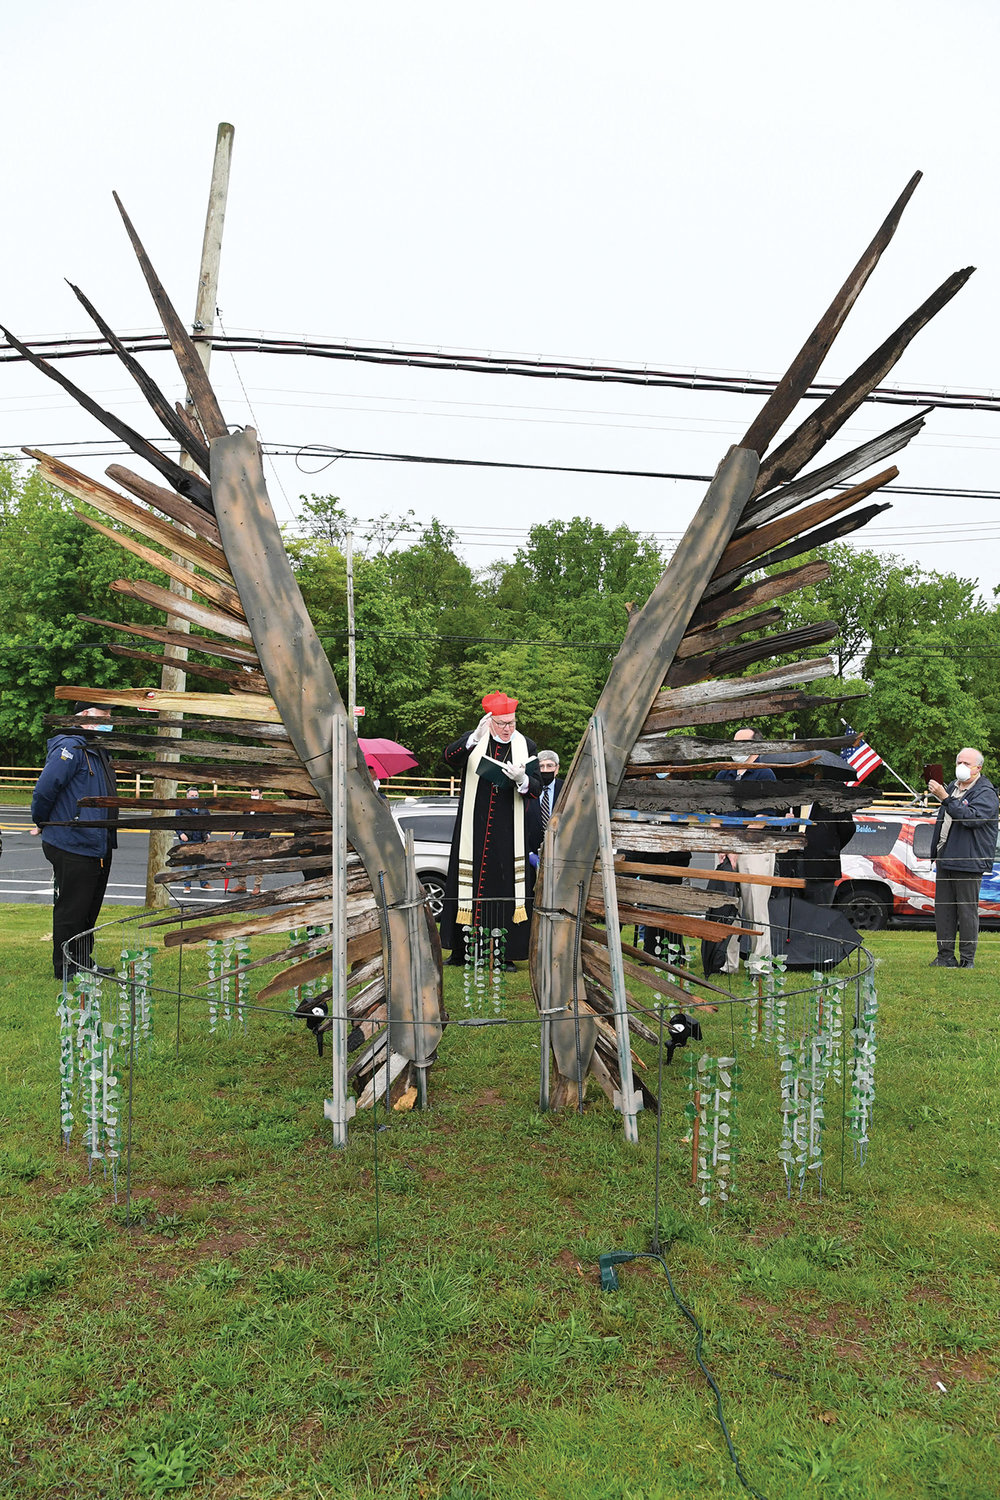 Cardinal Dolan blesses the 942 Voices sculpture at Mount Loretto on Staten Island May 23. The sculpture honors Staten Islanders who have lost their lives during the coronavirus pandemic, including two residents of Mount Loretto residential care facility.